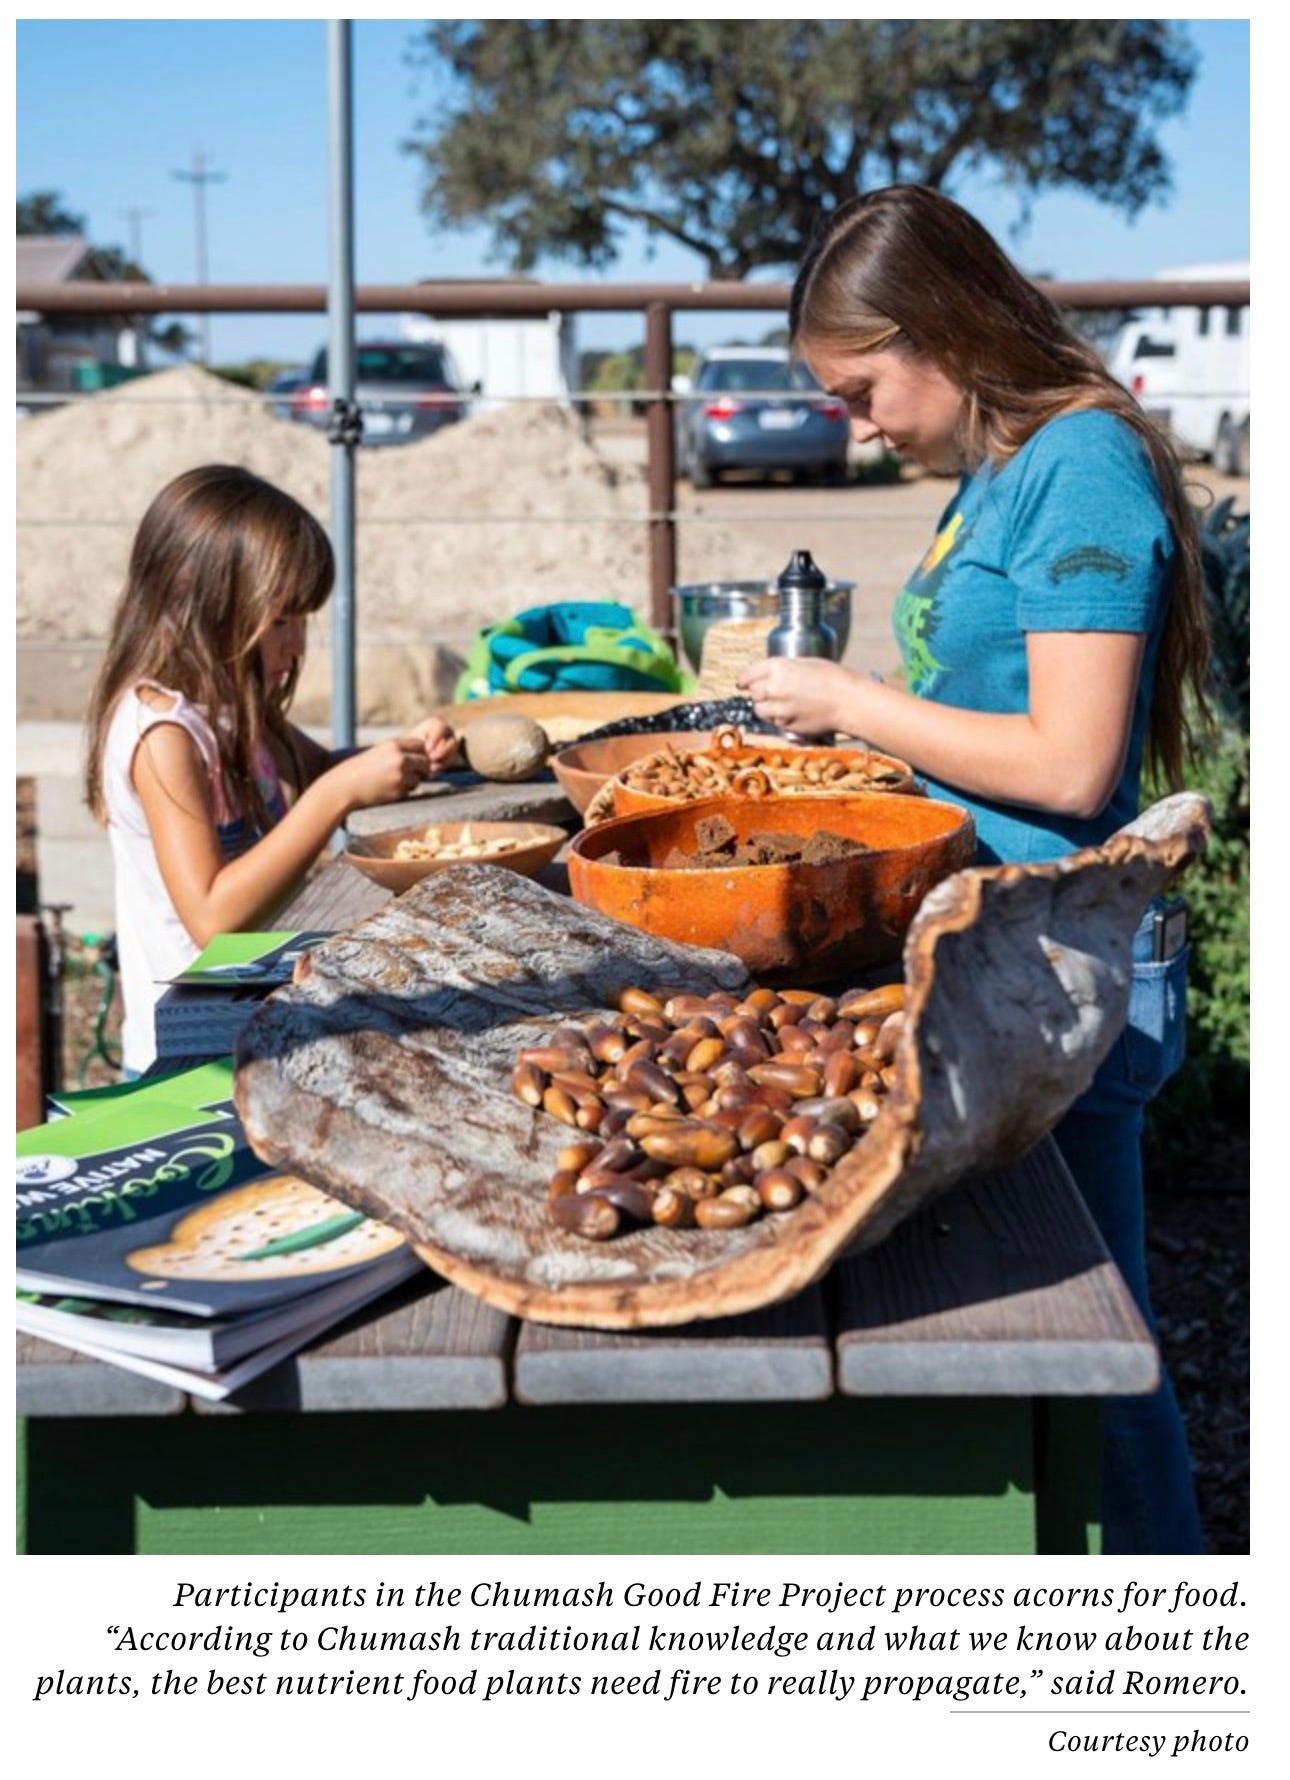 Participants in the Chumash Good Fire Project process acorns for food. “According to Chumash traditional knowledge and what we know about the plants, the best nutrient food plants need fire to really propagate,” said Romero. Courtesy photo